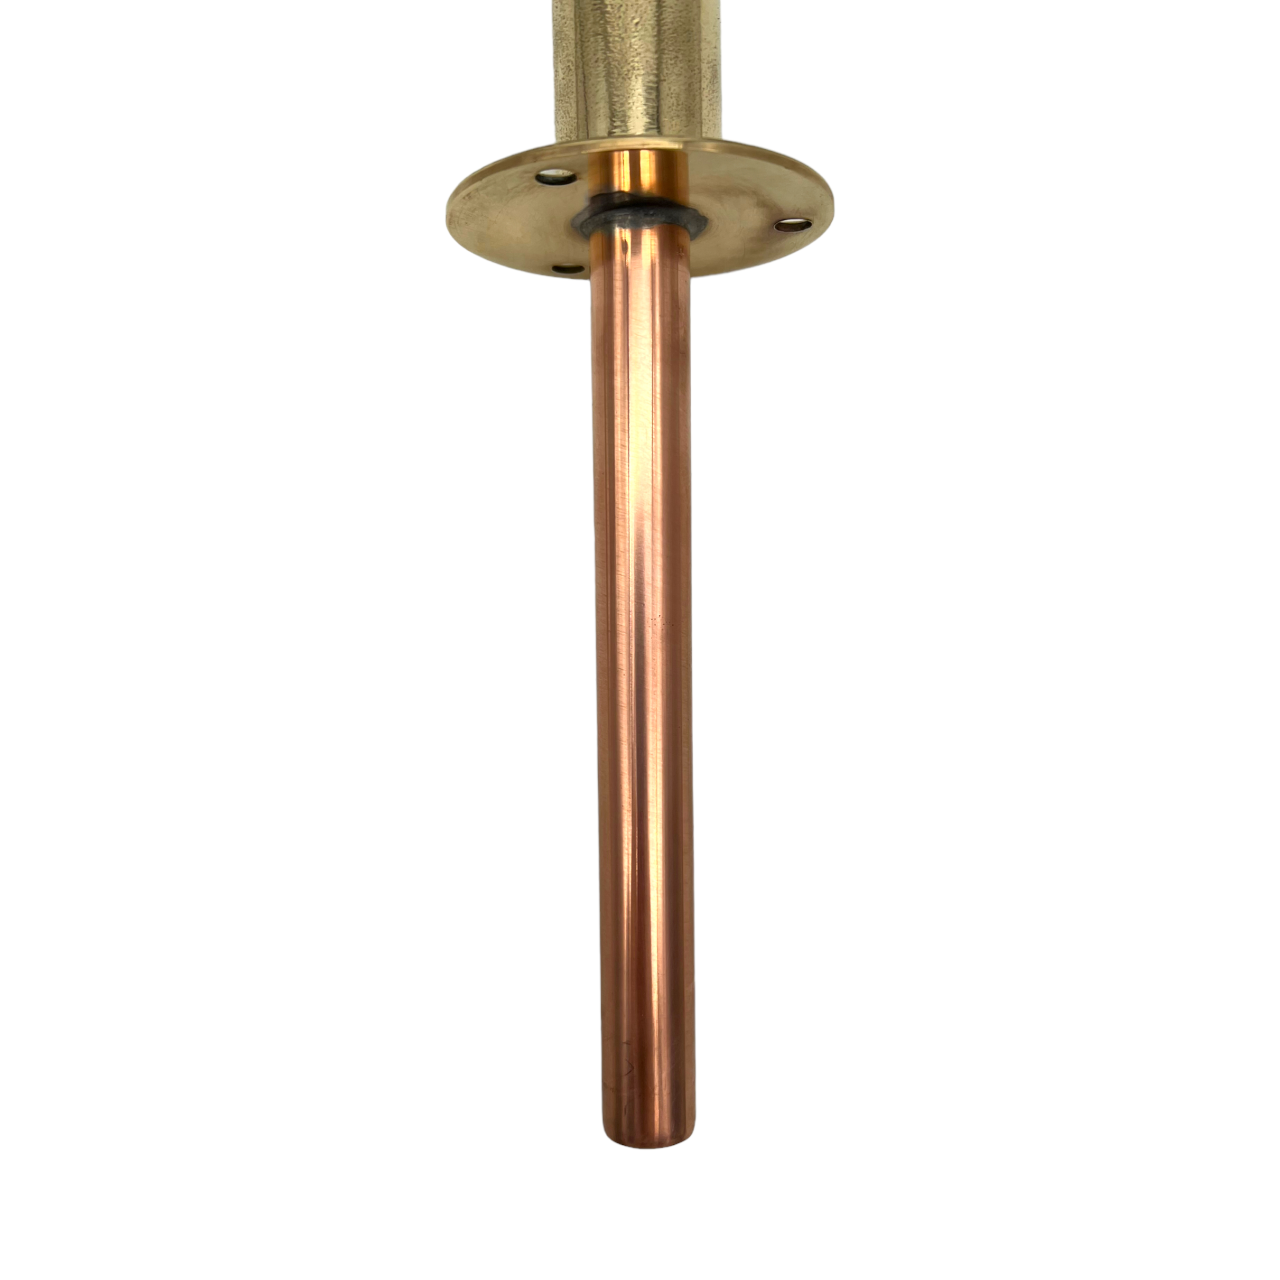 Vintage style brass and copper tap sold by All Things French Store